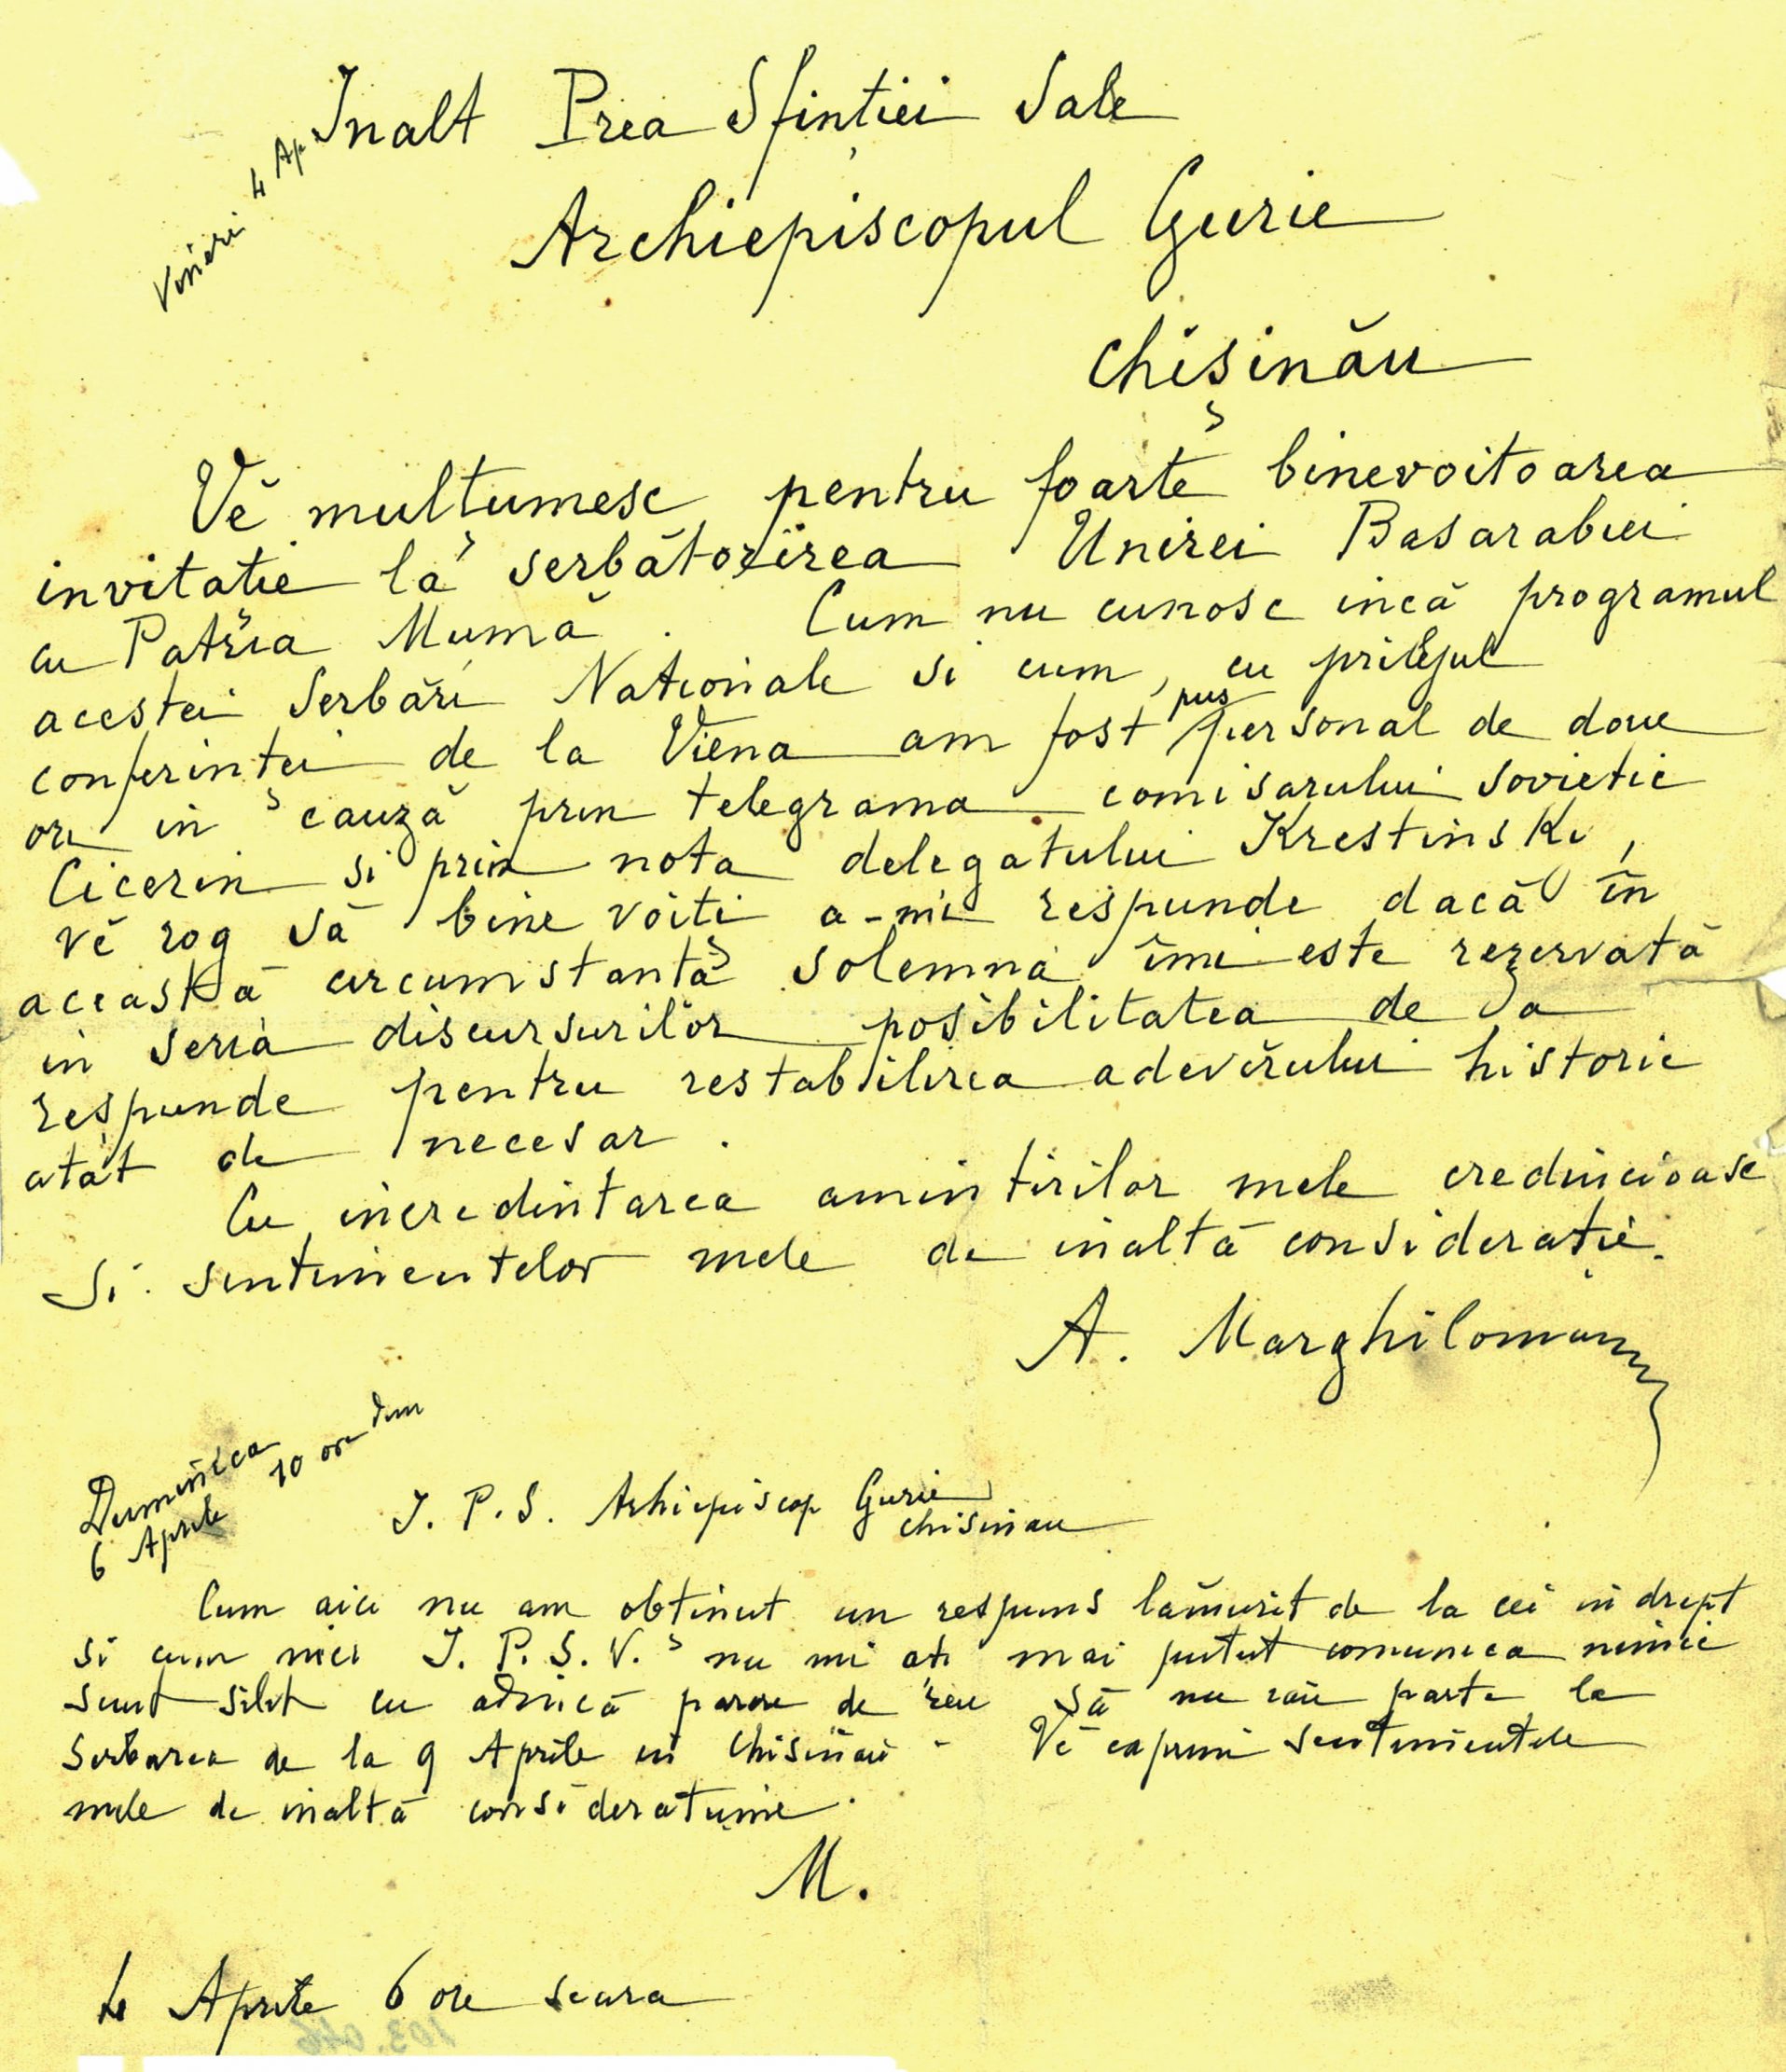 Letter of Alexandru Marghiloman, President of the Council of Ministers, to Bishop Gurie Grosu. April 4, 1918 (MNIR)